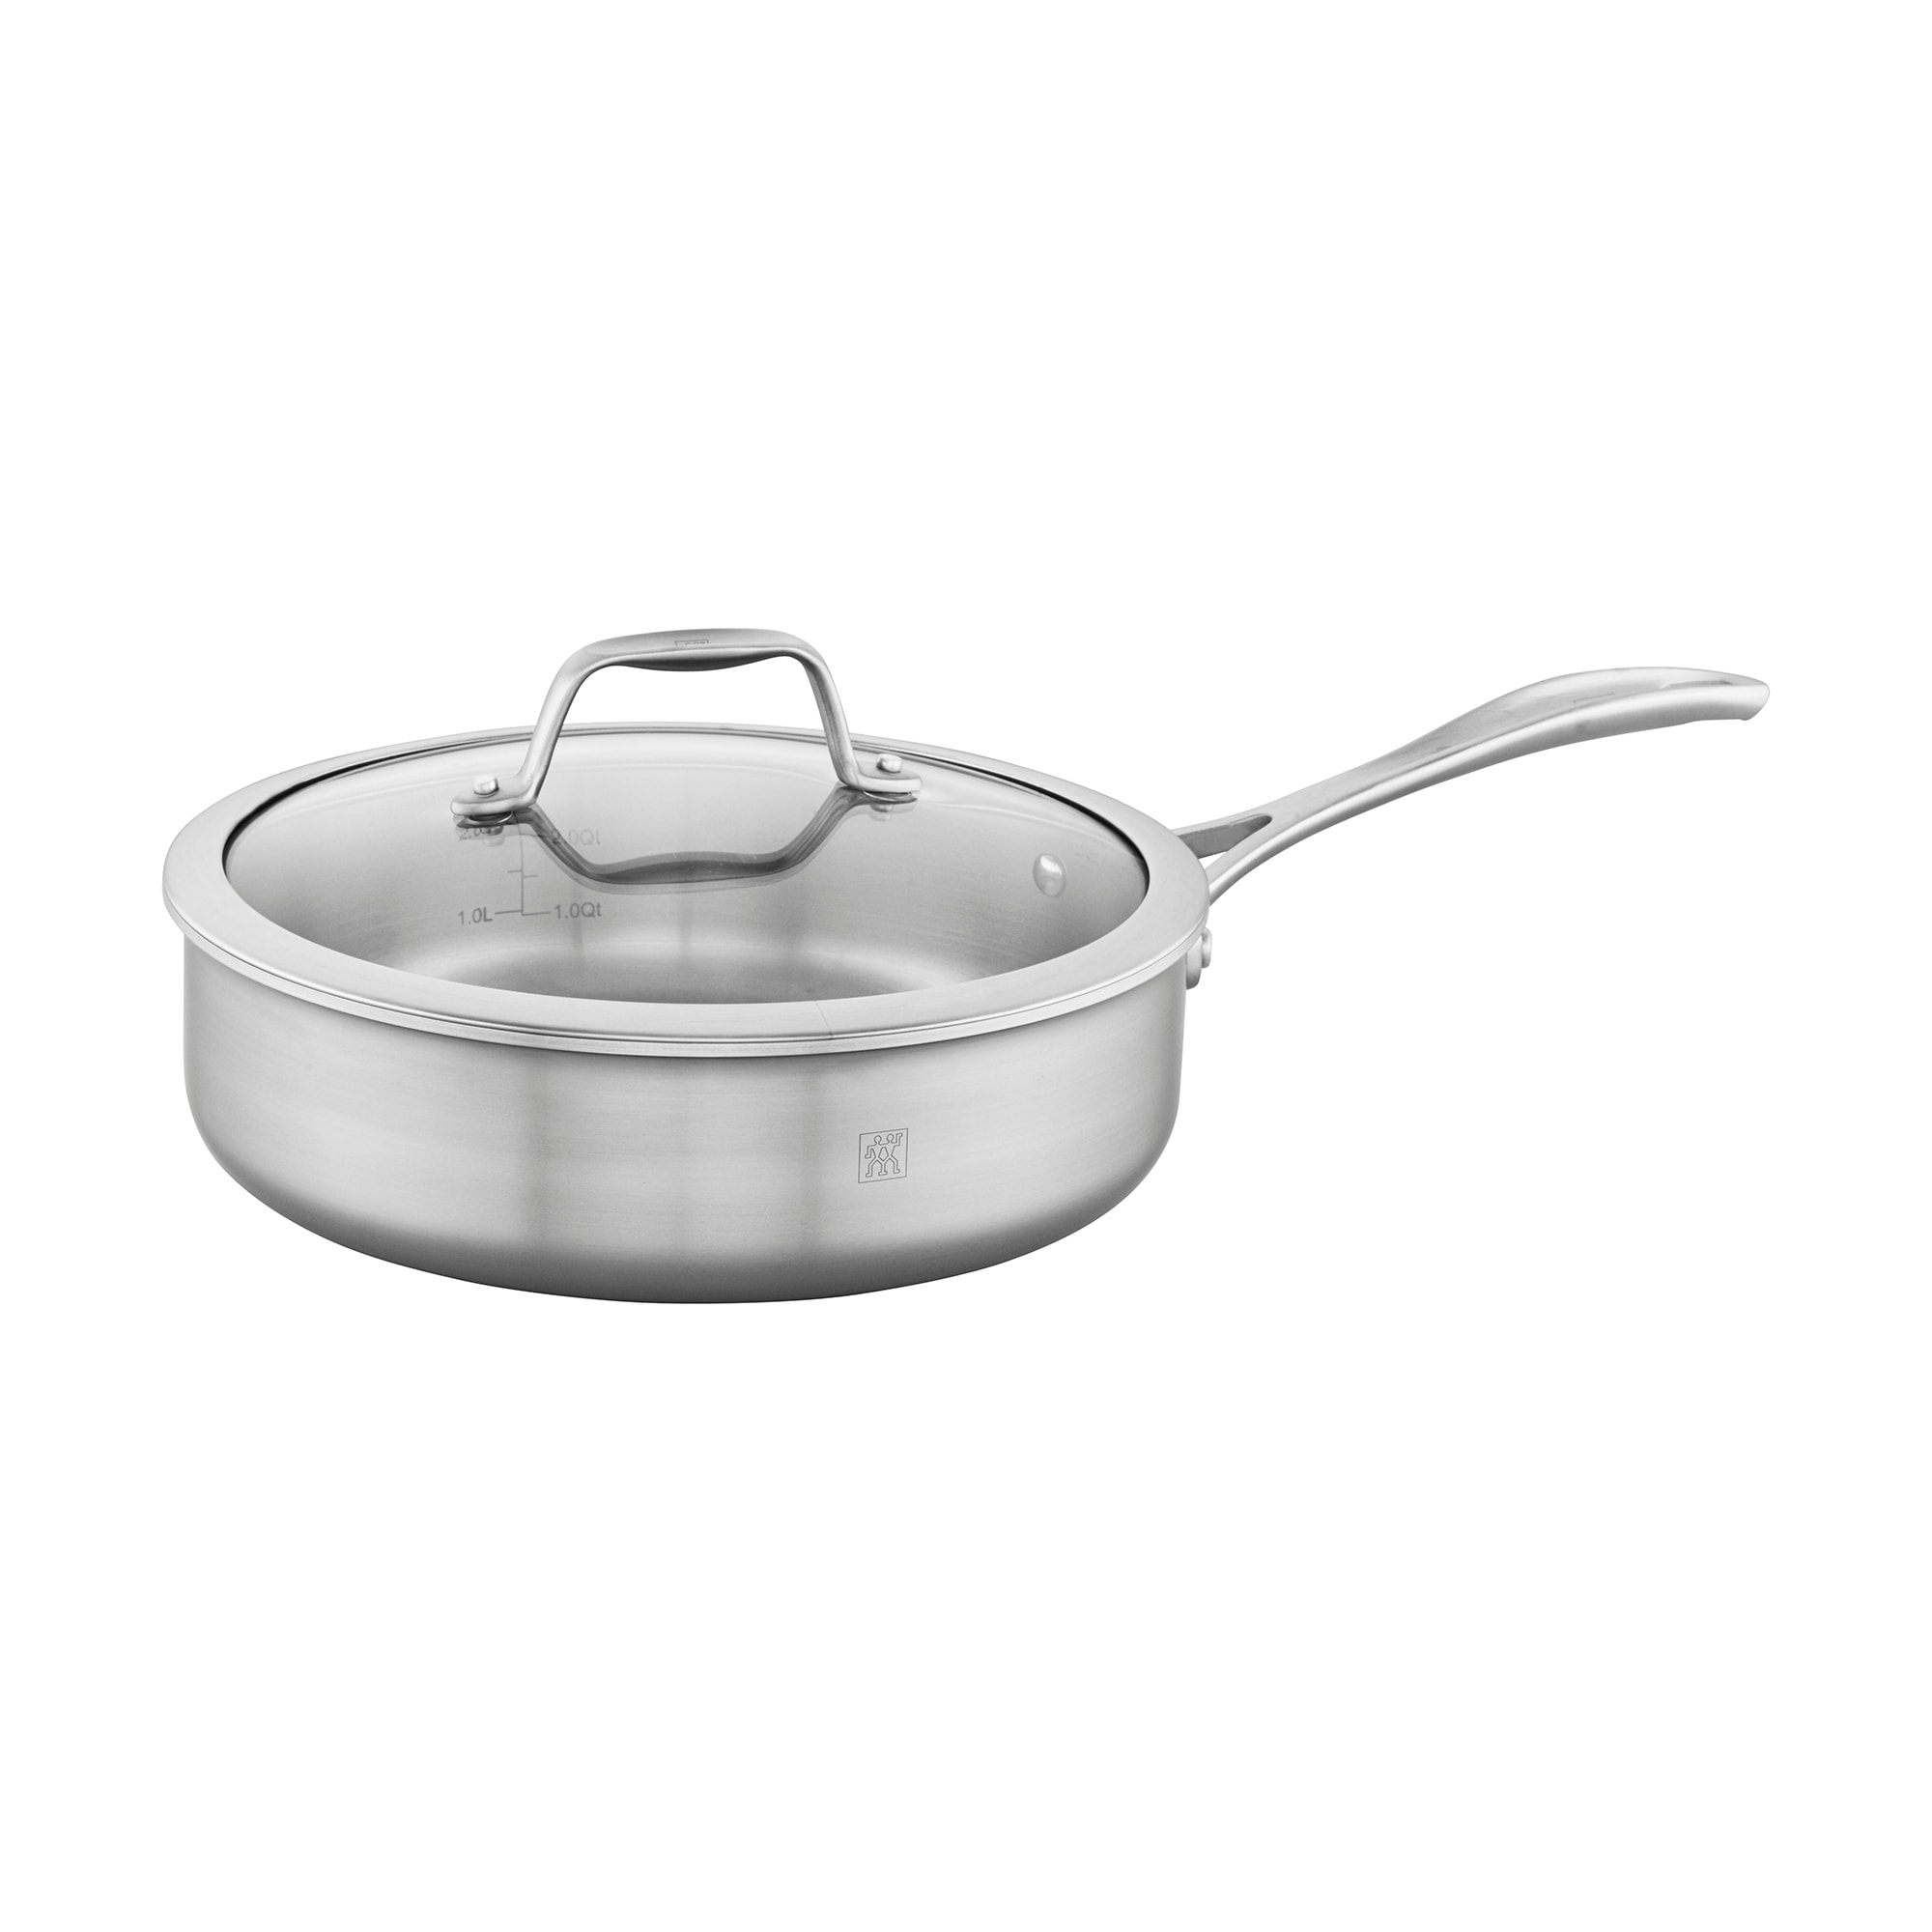 Zwilling Spirit 3-ply 14-inch Stainless Steel Ceramic Nonstick Fry